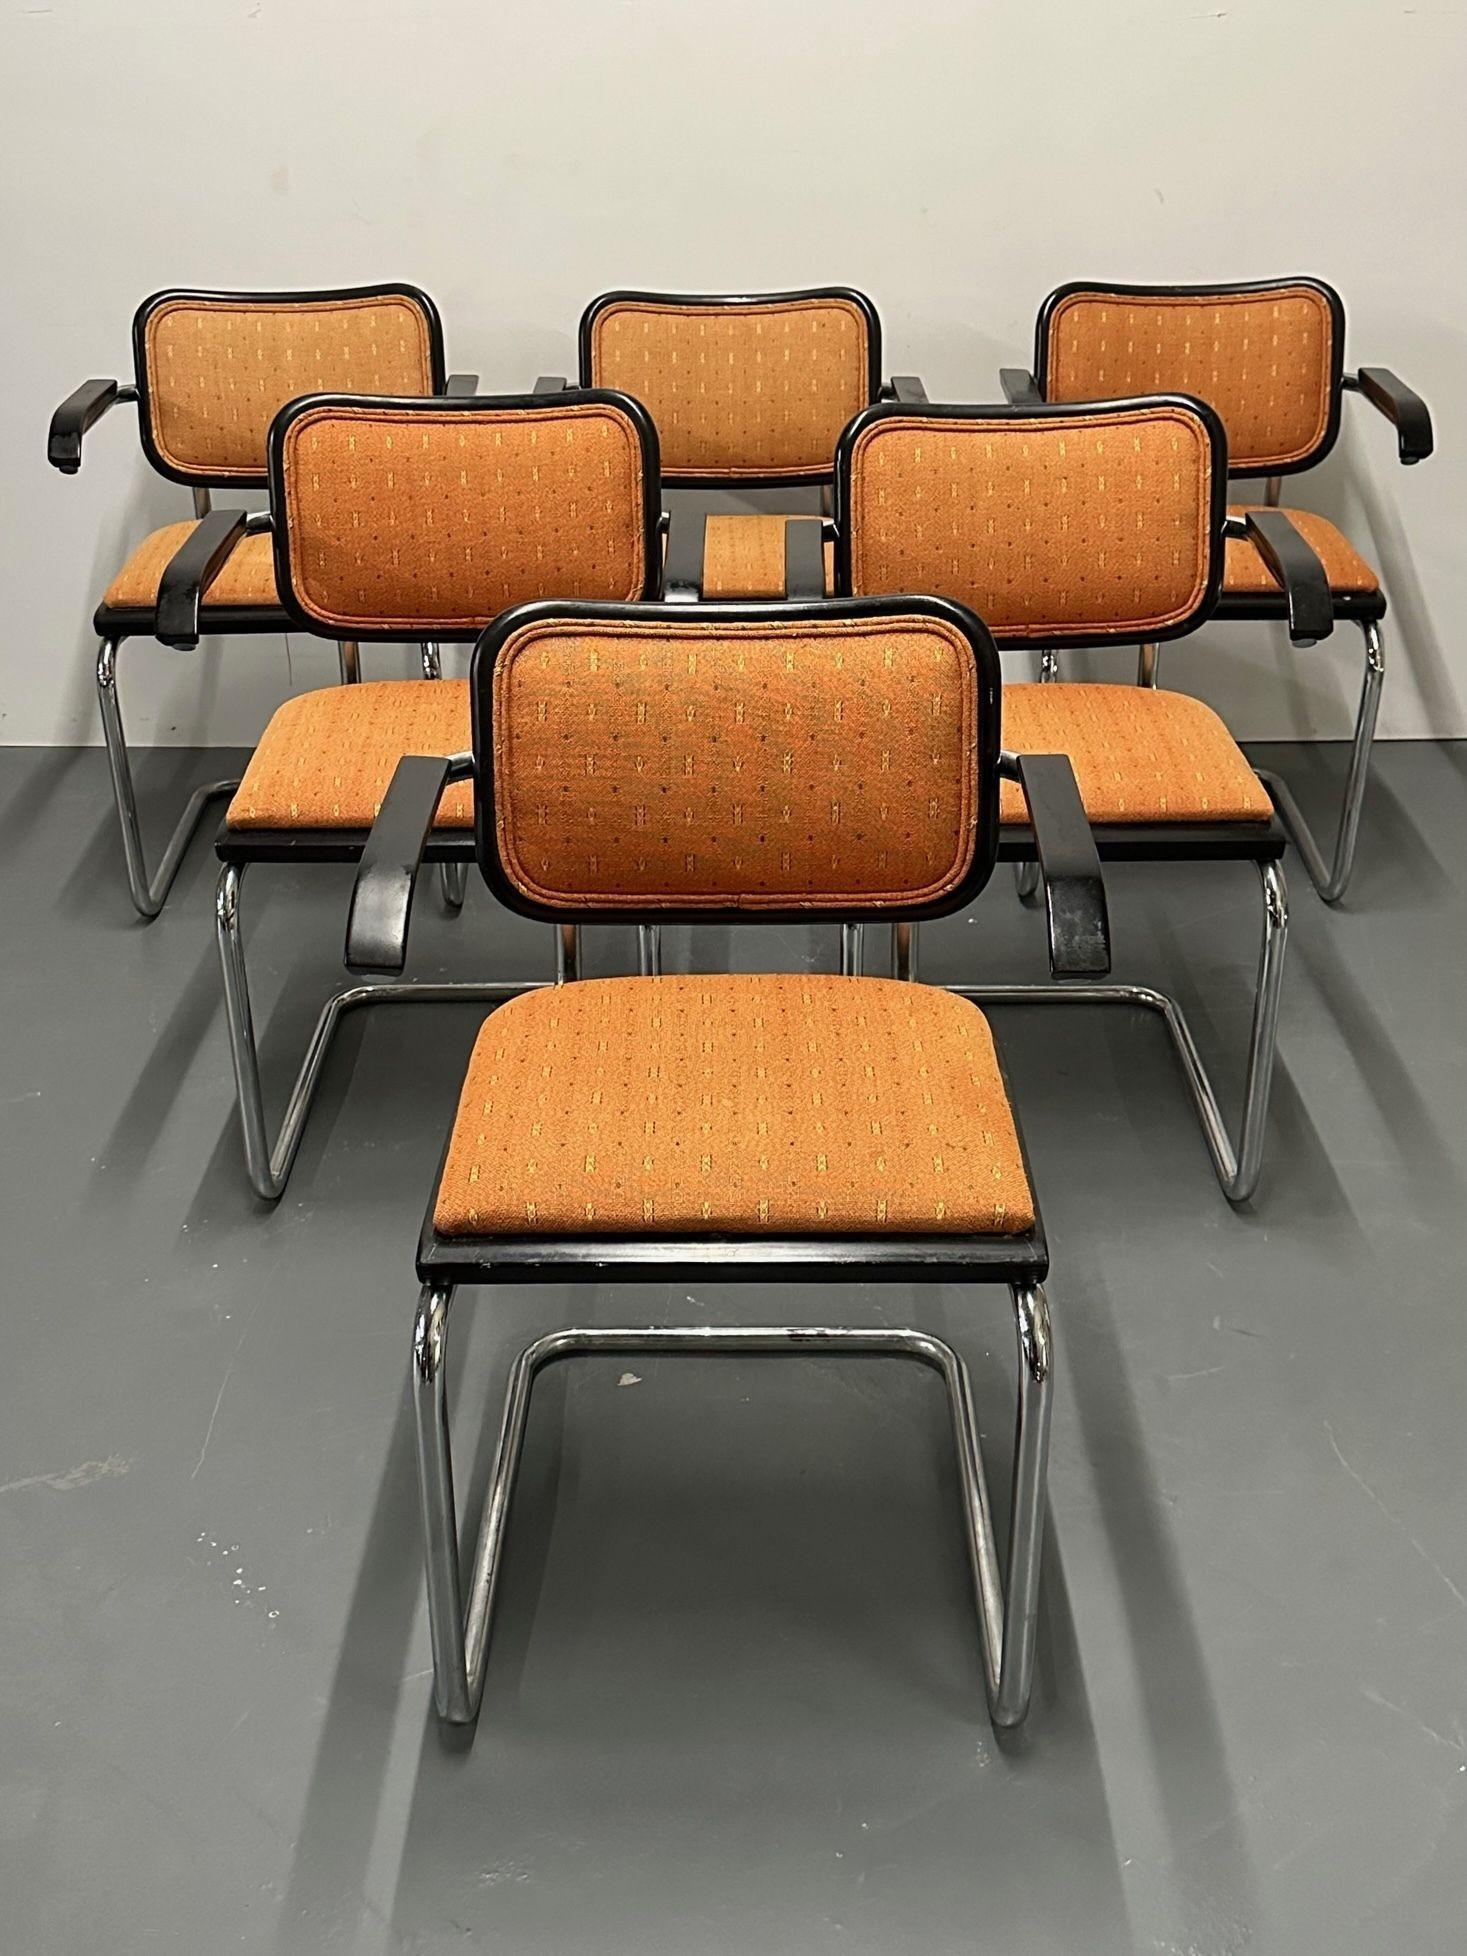 Six Mid-Century Modern Marcel Breuer for Knoll Cesca Chairs, Lacquer, 1960s
 
Set of six 'Cesca' chairs designed by Marcel Breuer for Knoll International. Each chair maintains it's original chrome frame, lacquer finishing, upholstery, and